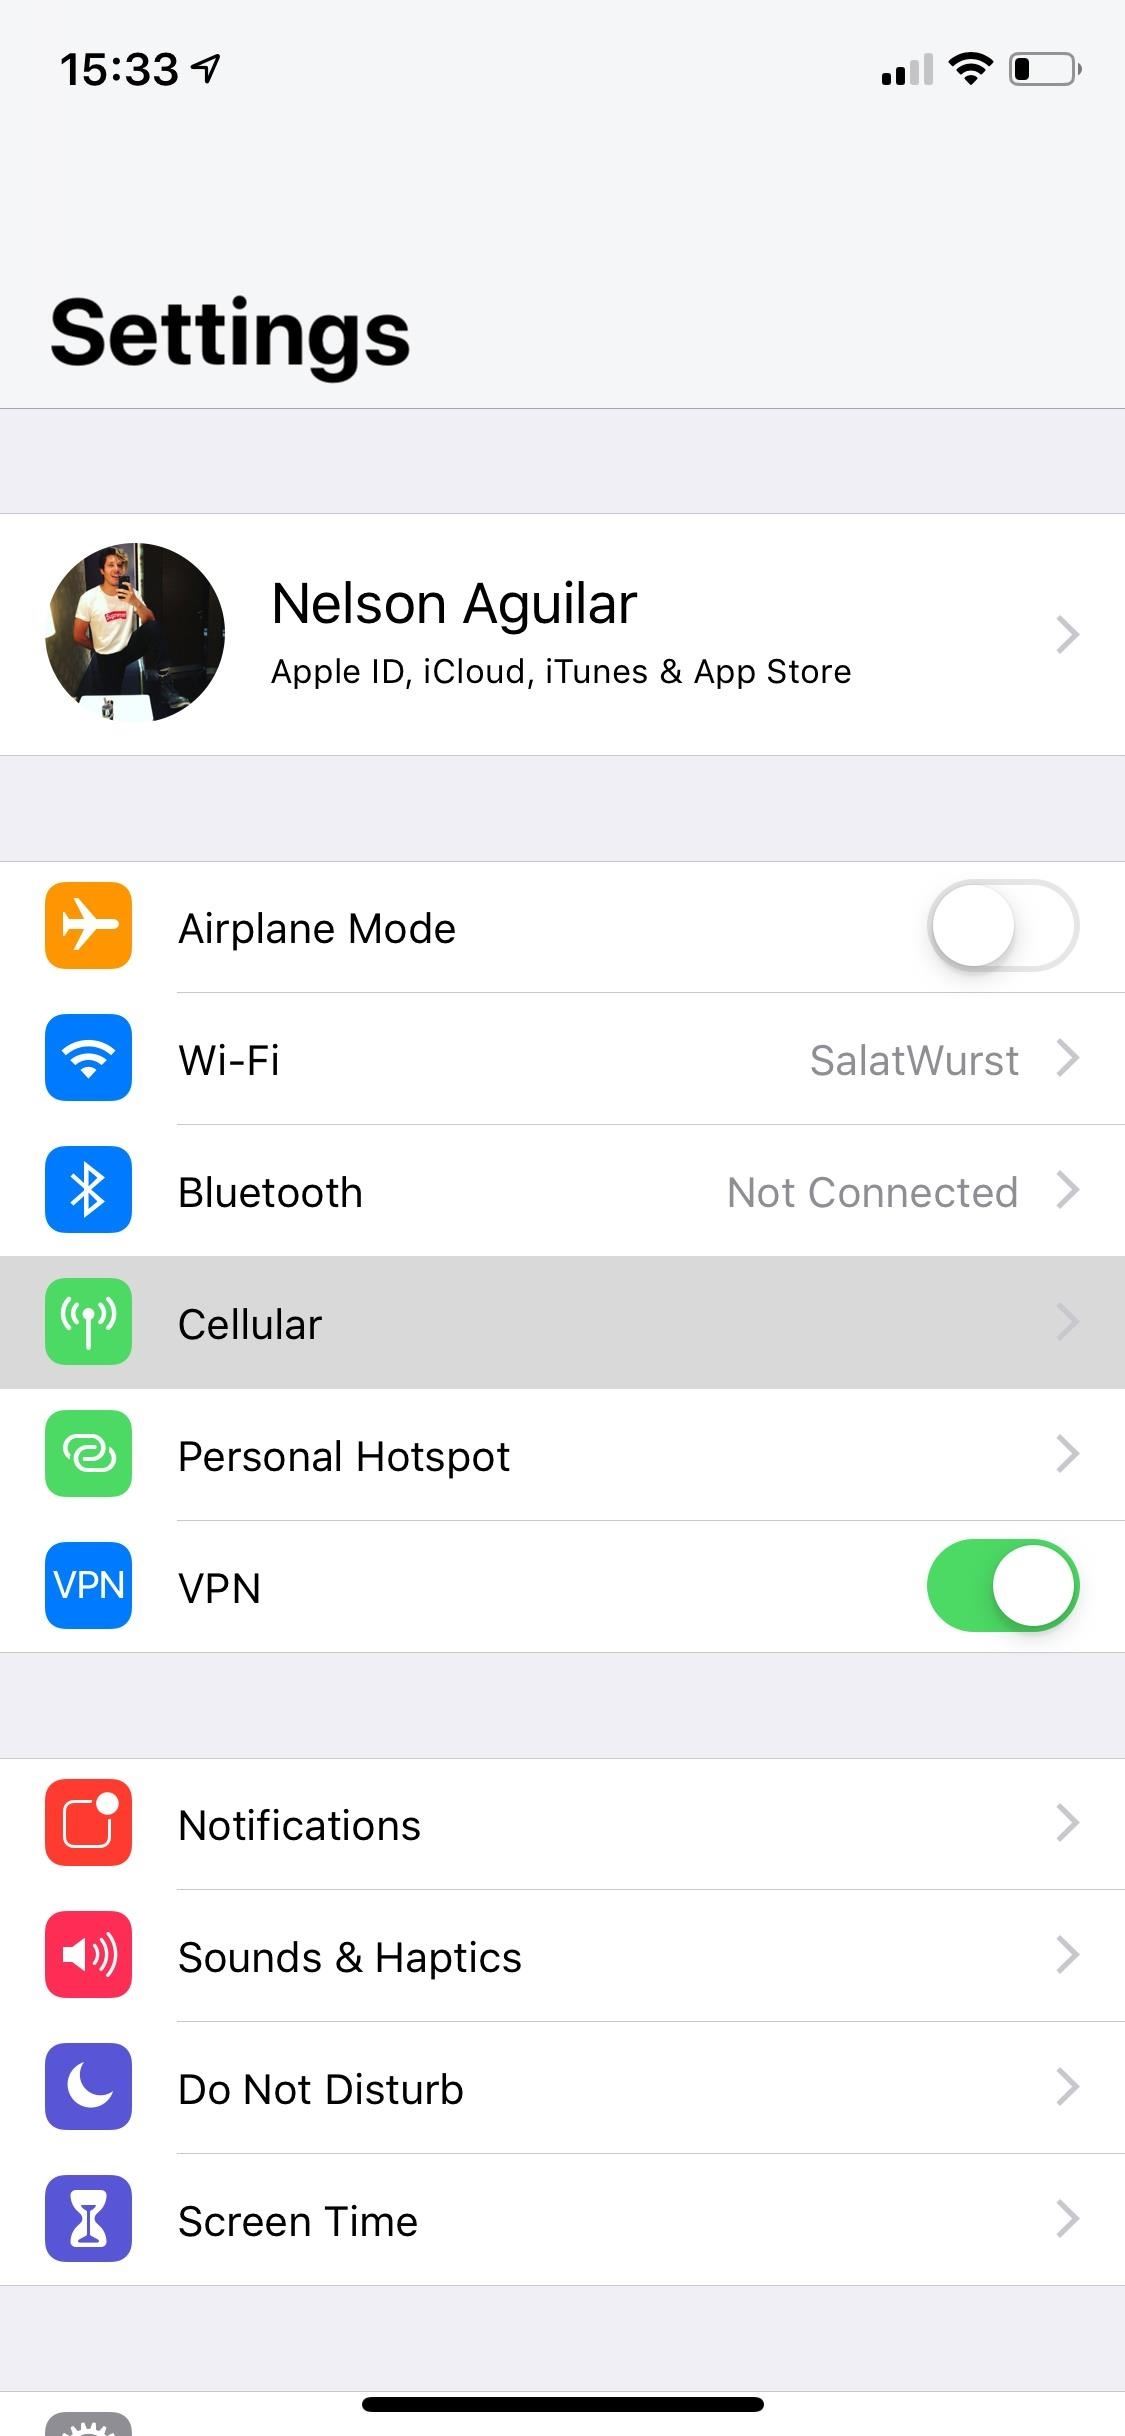 How to Fix VPN Issues on iPhone to Ensure a More Private Internet Experience